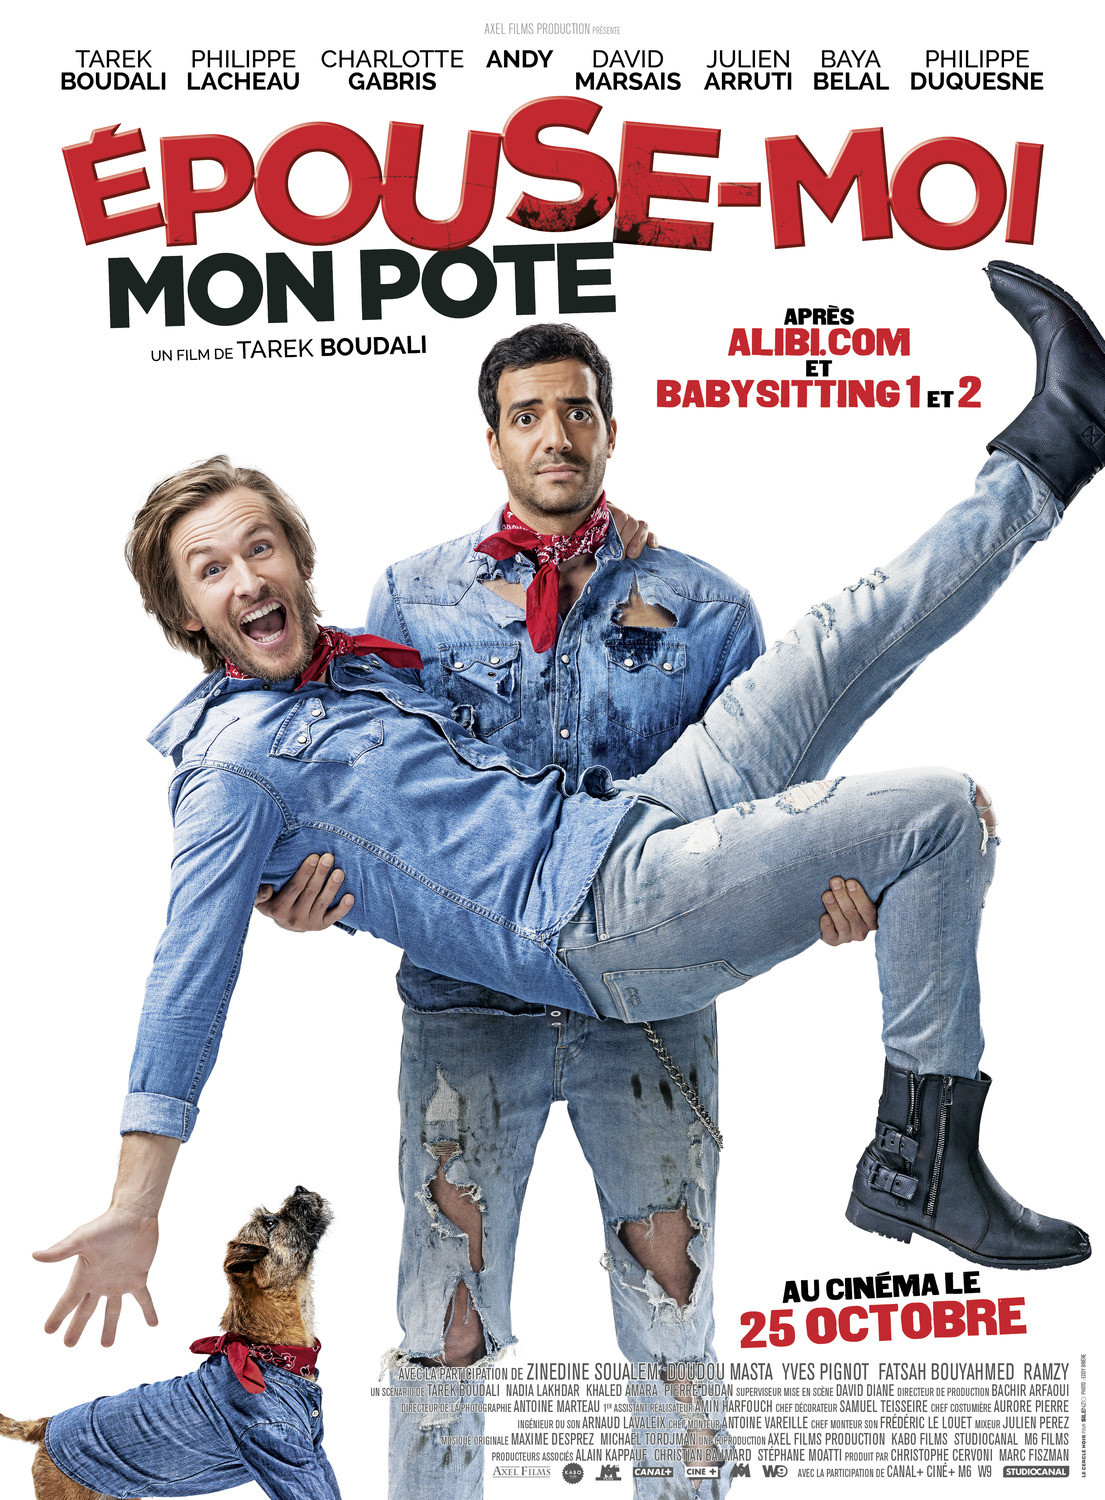 Extra Large Movie Poster Image for Épouse-moi mon pote (#1 of 2)